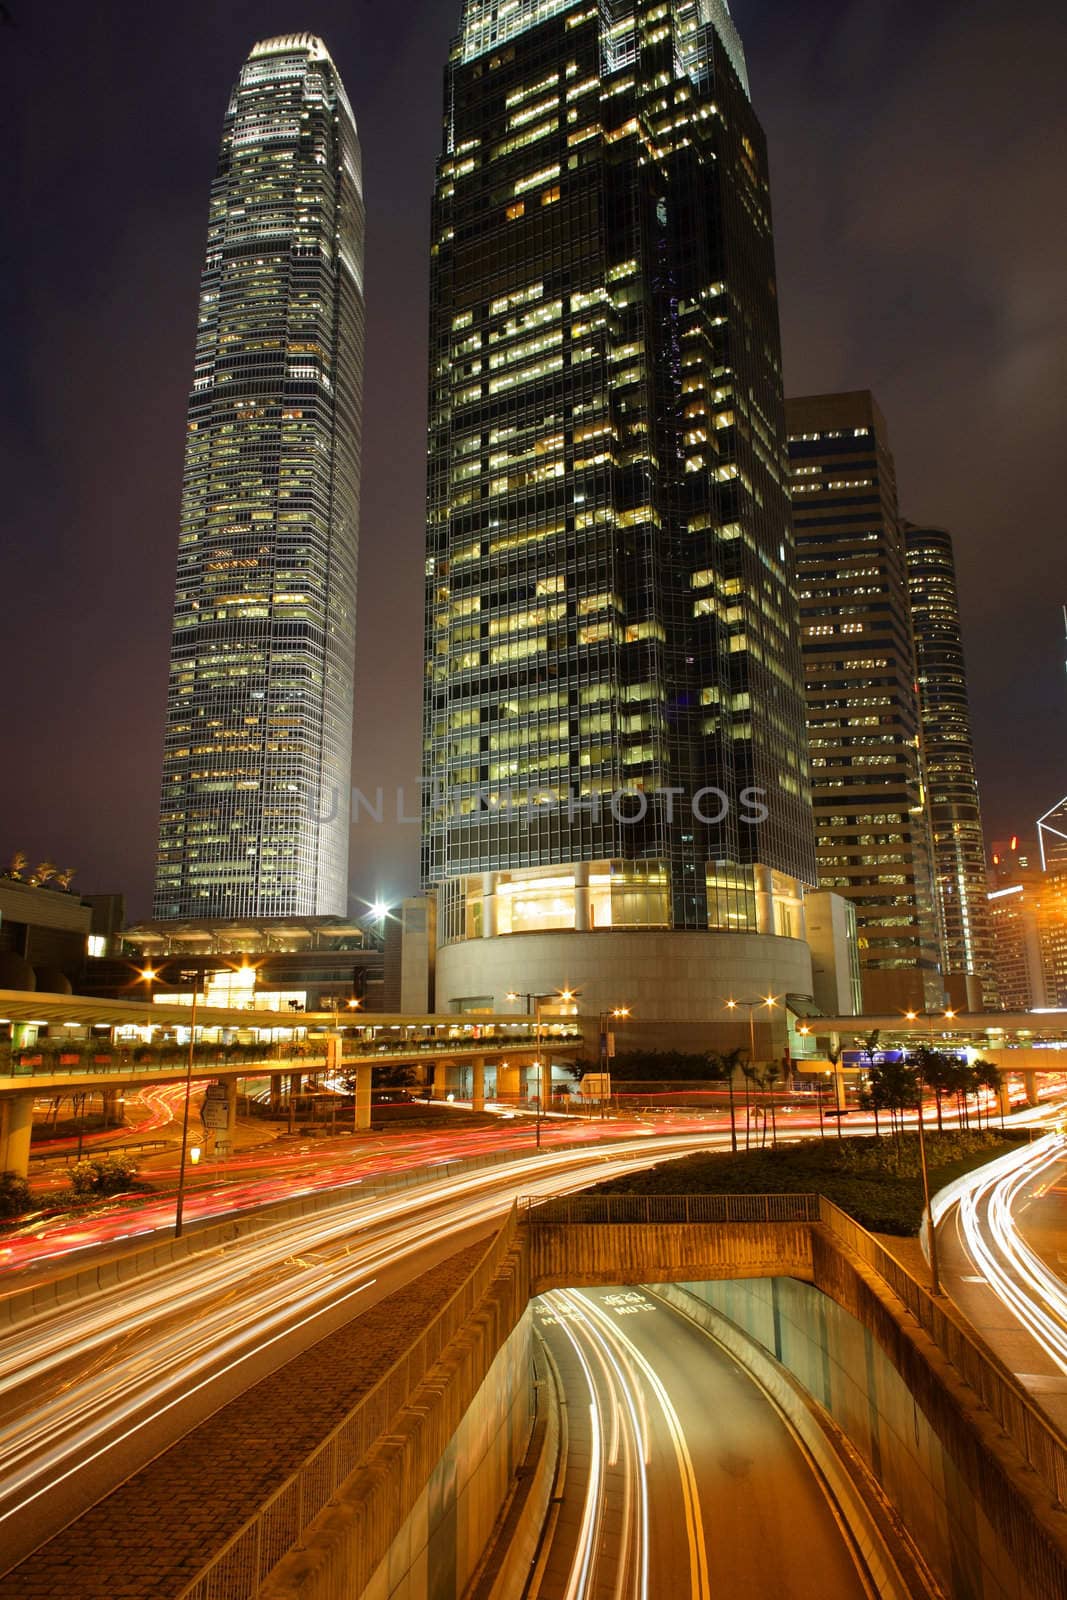 Night view of IFC (International Financial Centre) in Hong Kong with curving traffic light track.